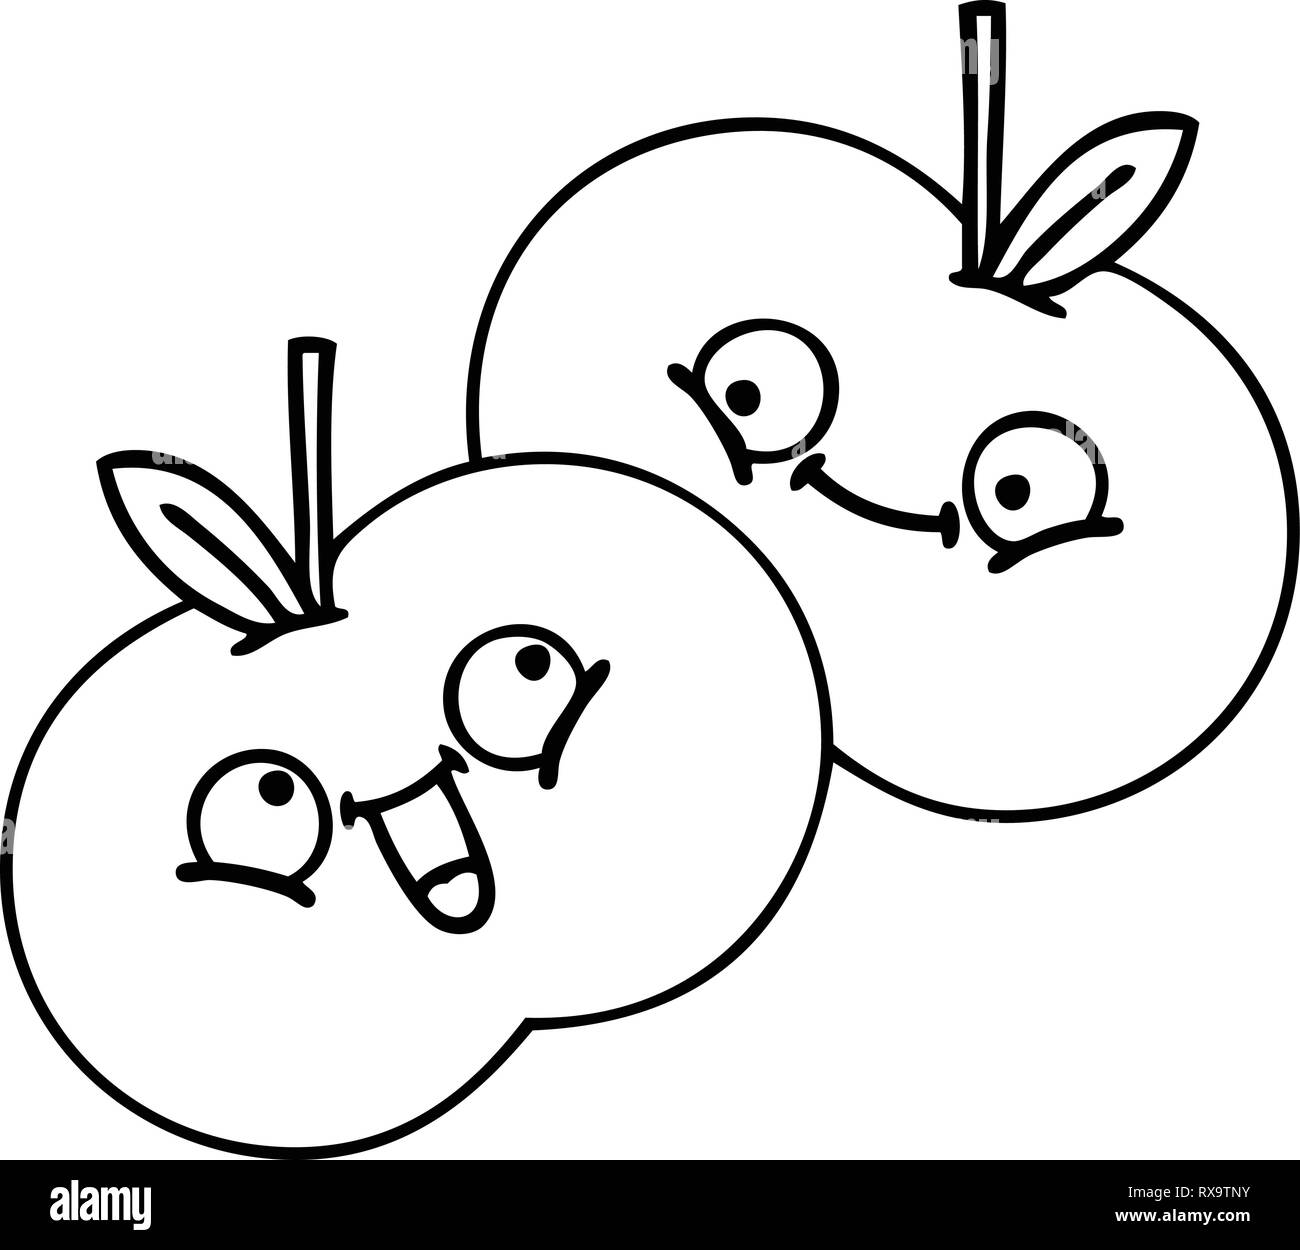 line drawing cartoon of a apples Stock Vector